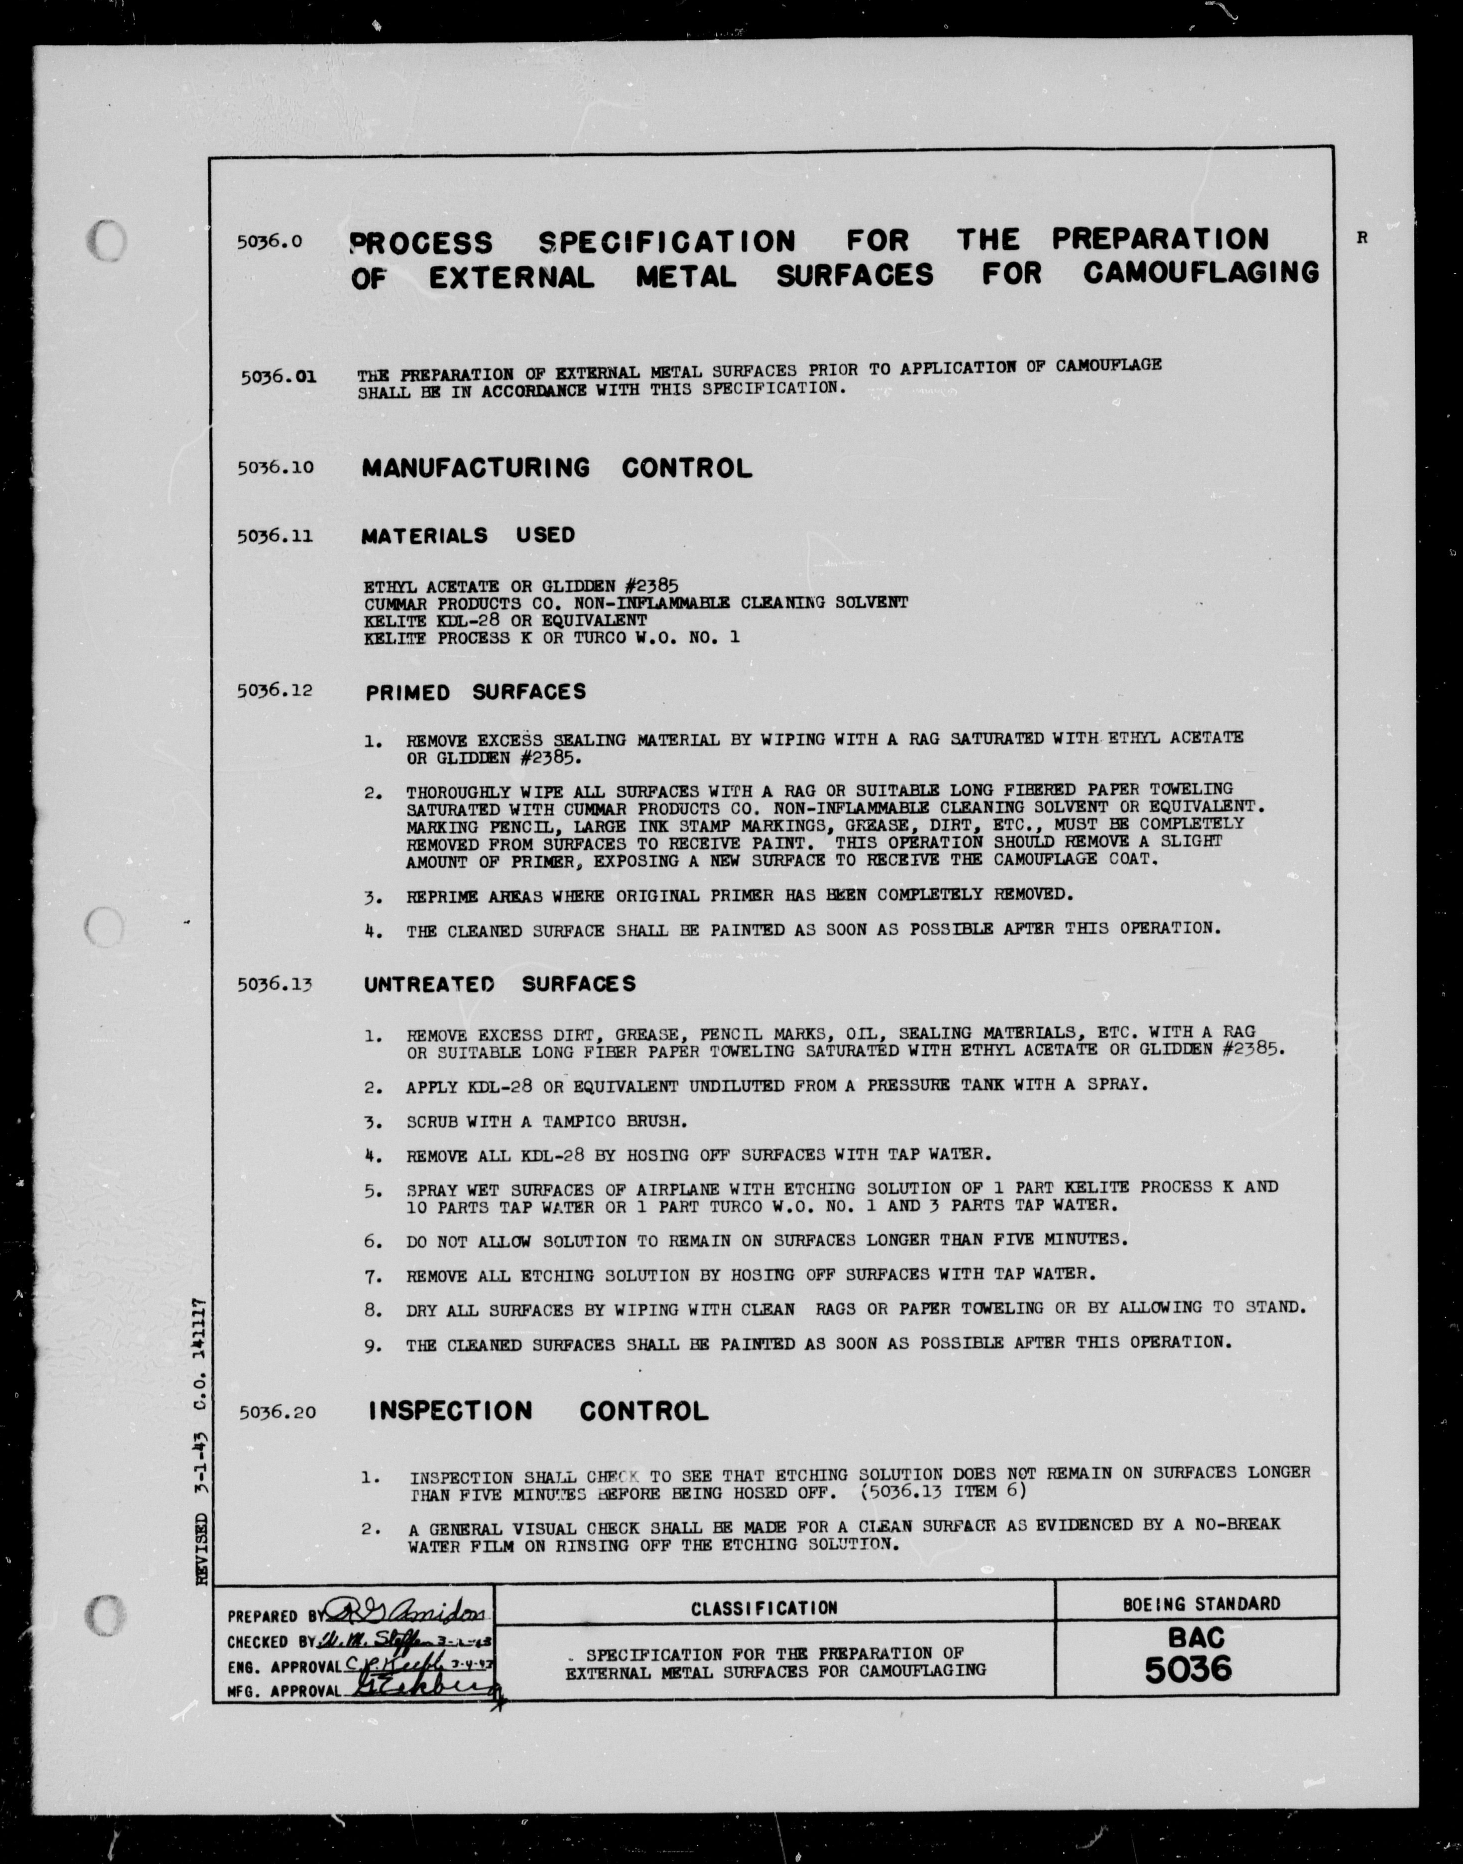 Sample page 1 from AirCorps Library document: Preparation of External Metal Surfaces for Camouflaging